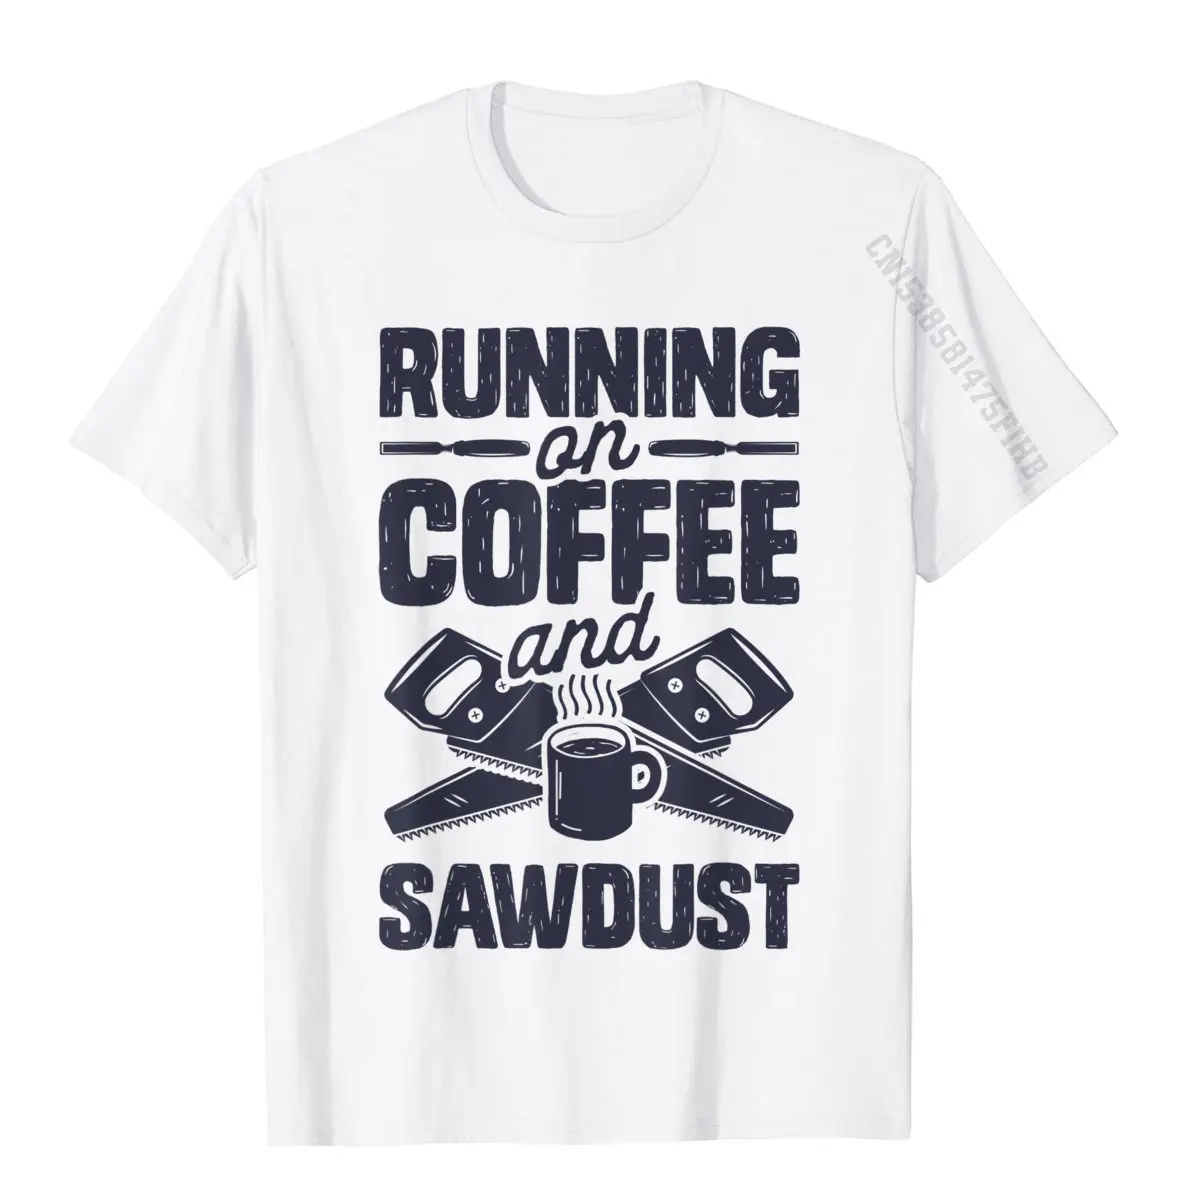 Printed Tops T Shirt Faddish Crewneck Crazy Short Sleeve Cotton Fabric Male T Shirts Printed On Clothing Shirt Running on Coffee and Sawdust T shirt Woodworking Woodworker T-Shirt__882 white